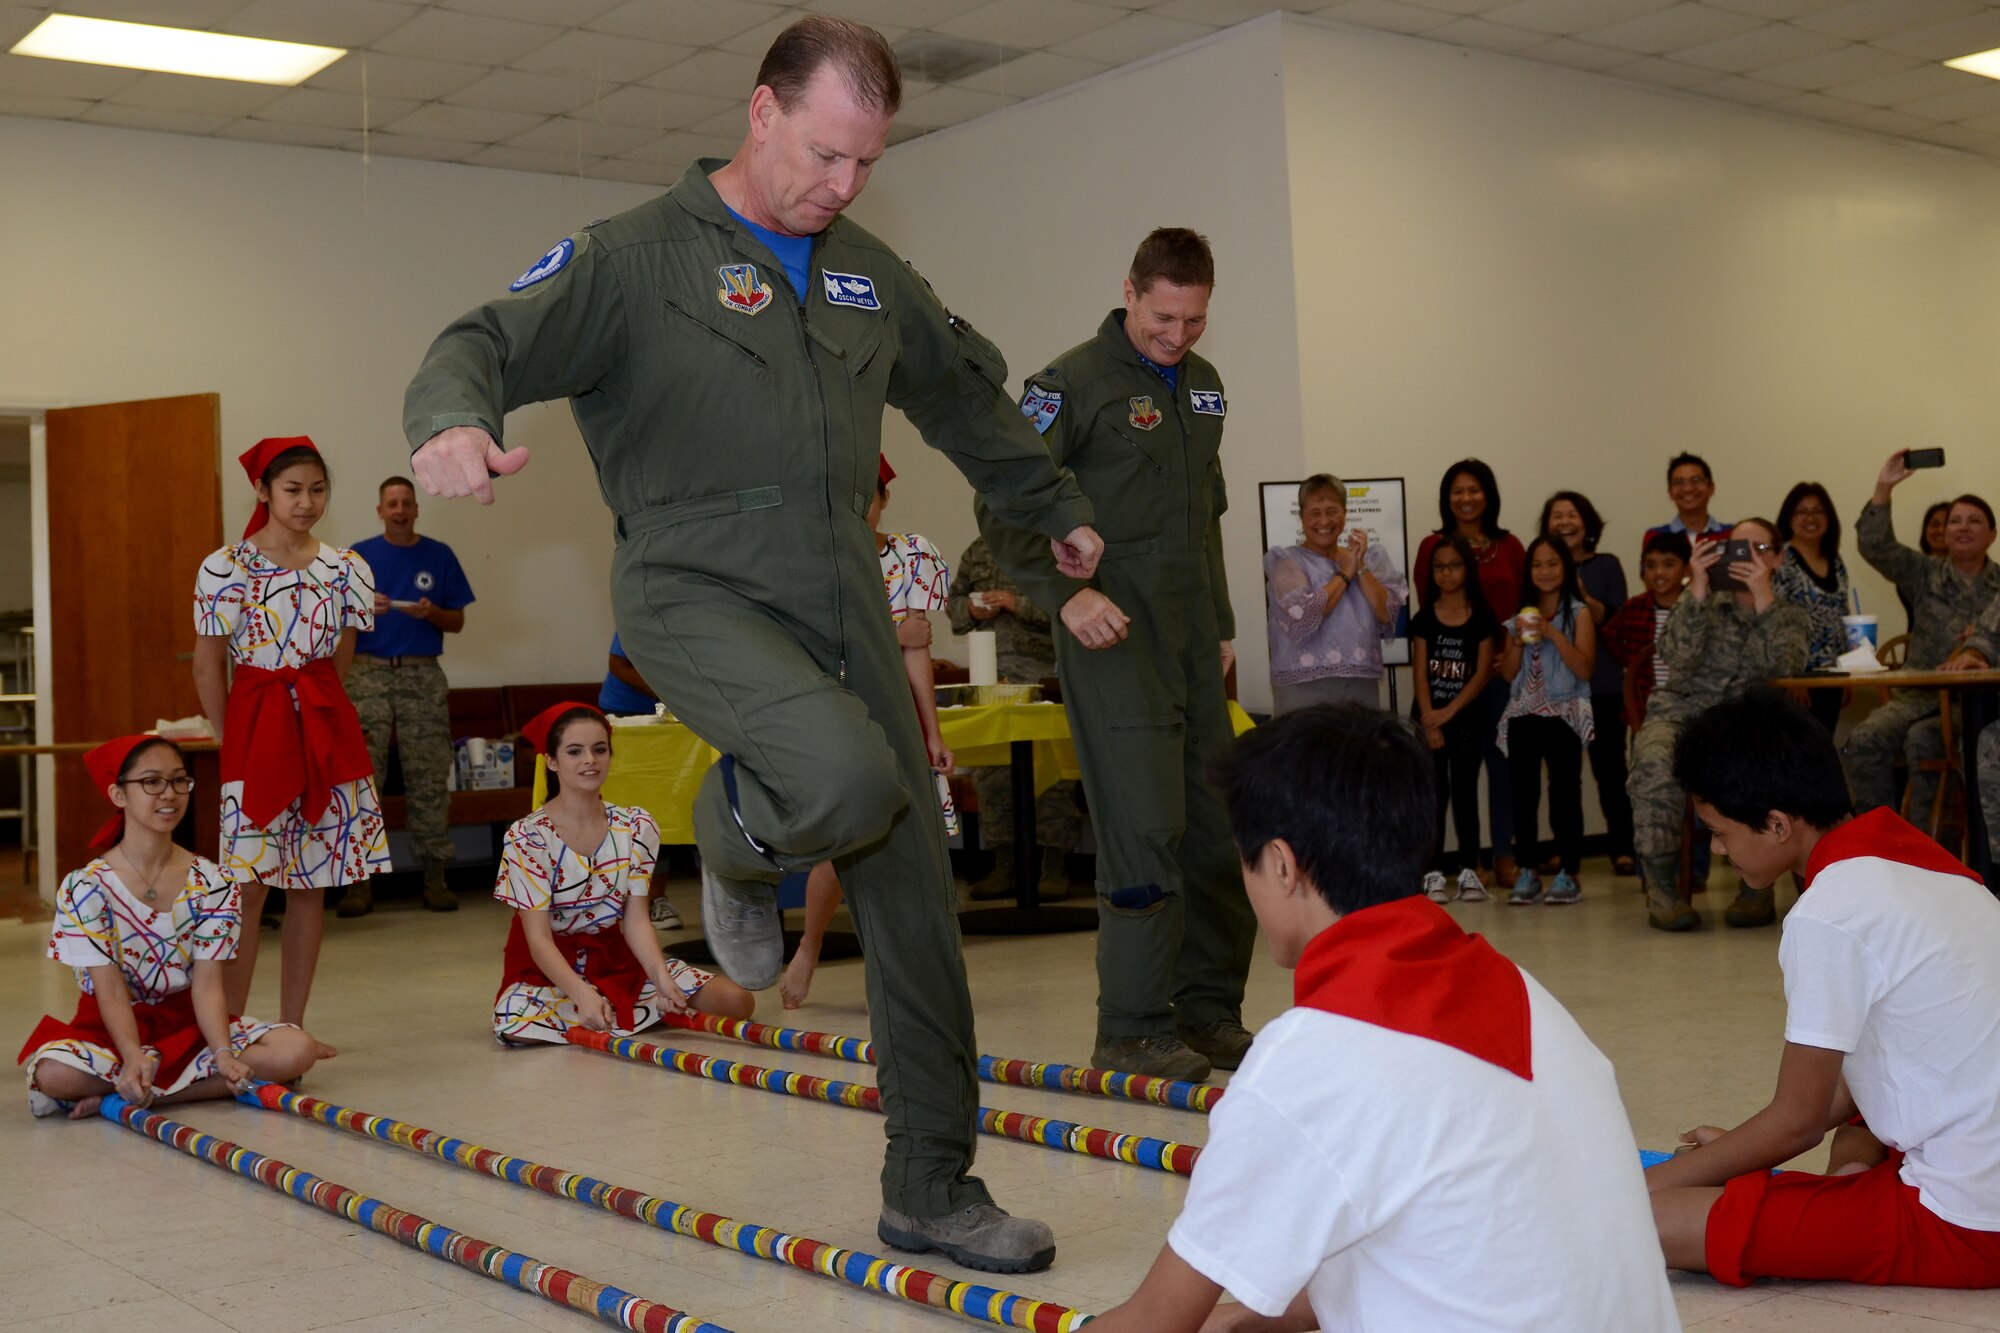 U.S. Air Force Col. David Meyer (foreground), 169th Fighter Wing commander and Col. Scott Bridgers, the 169th Maintenance Group commander, learn the Tinikling Dance, a Filipino-originated dance the teen and youth dance troop from the Filipino-American Association of Greater Columbia performed at McEntire Joint National Guard Base, S.C., Nov. 7, 2015, during the annual Diversity Day event in the base canteen. Diversity Day combines the Department of Defense's monthly diversity programs into a one day event for guardsmen to learn about other cultures and to celebrate diversity. (U.S. Air National Guard photo by Airman 1st Class Ashleigh Pavelek/RELEASED)